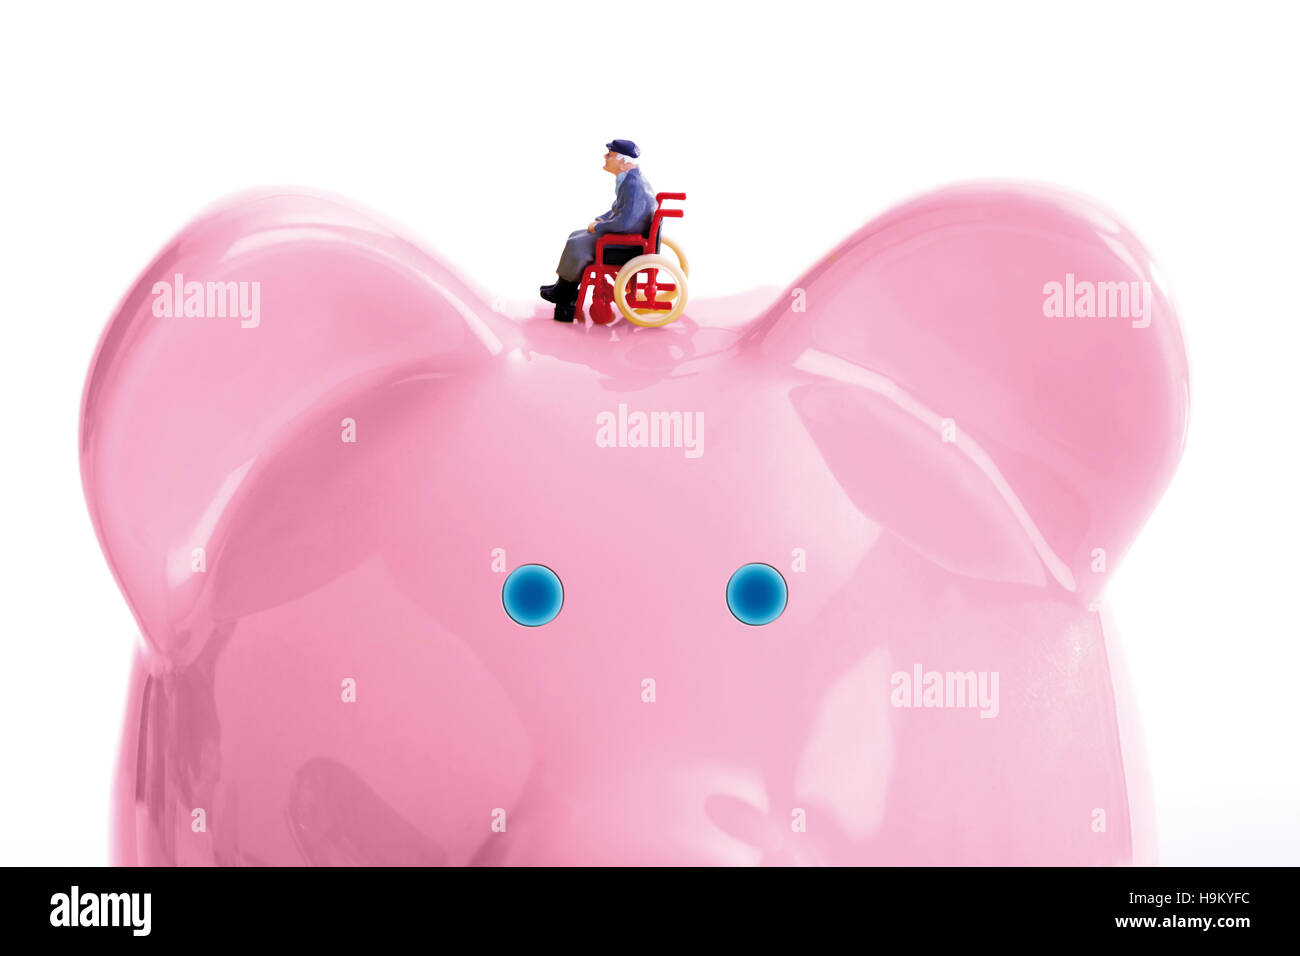 Figurine of a man in a wheelchair on a pink biggy bank Stock Photo